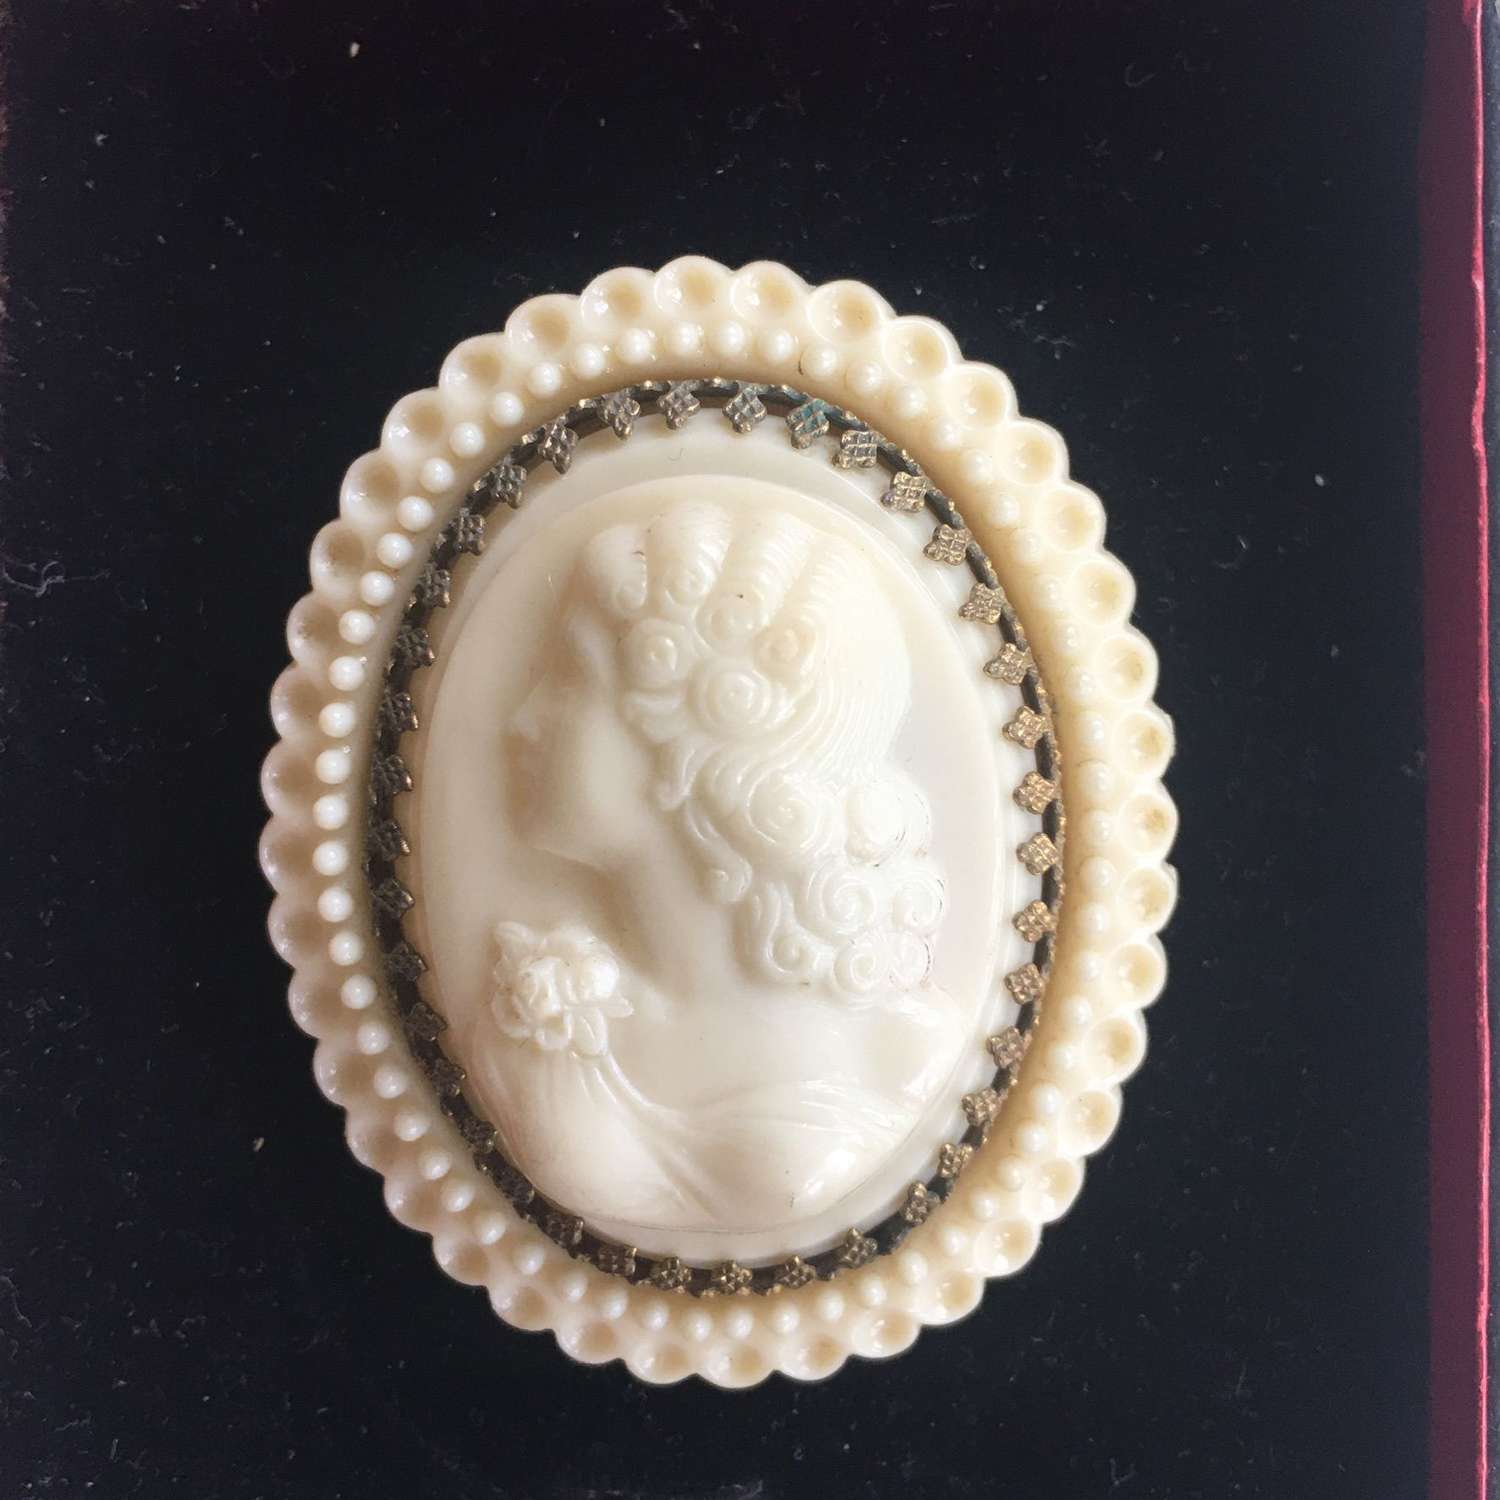 Vintage French celluloid cameo brooch